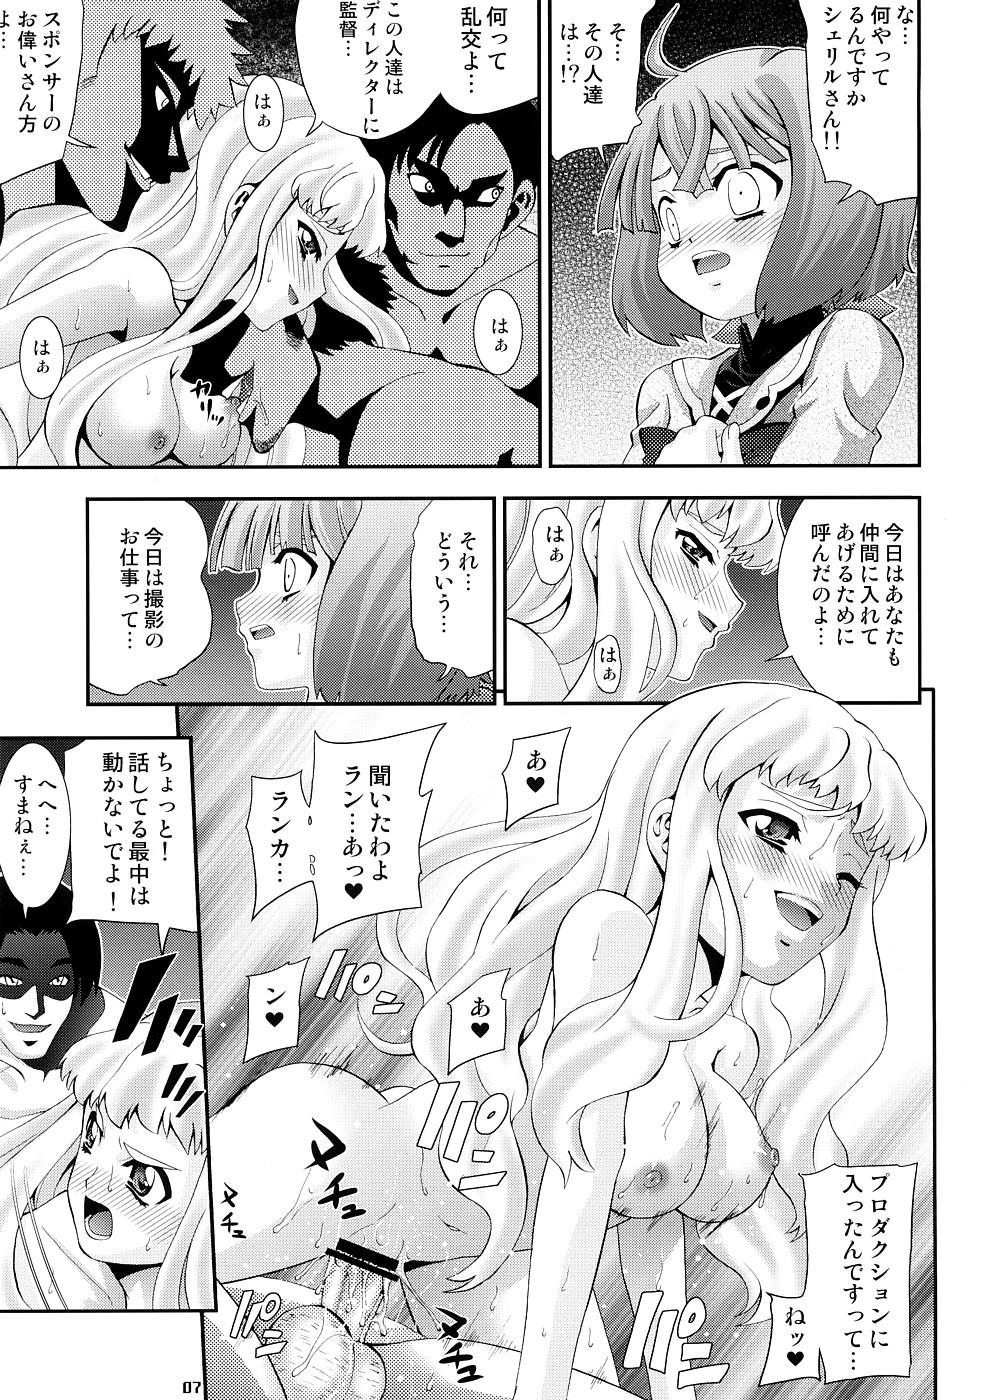 Ejaculation Song Bird - Macross frontier Tinytits - Page 6